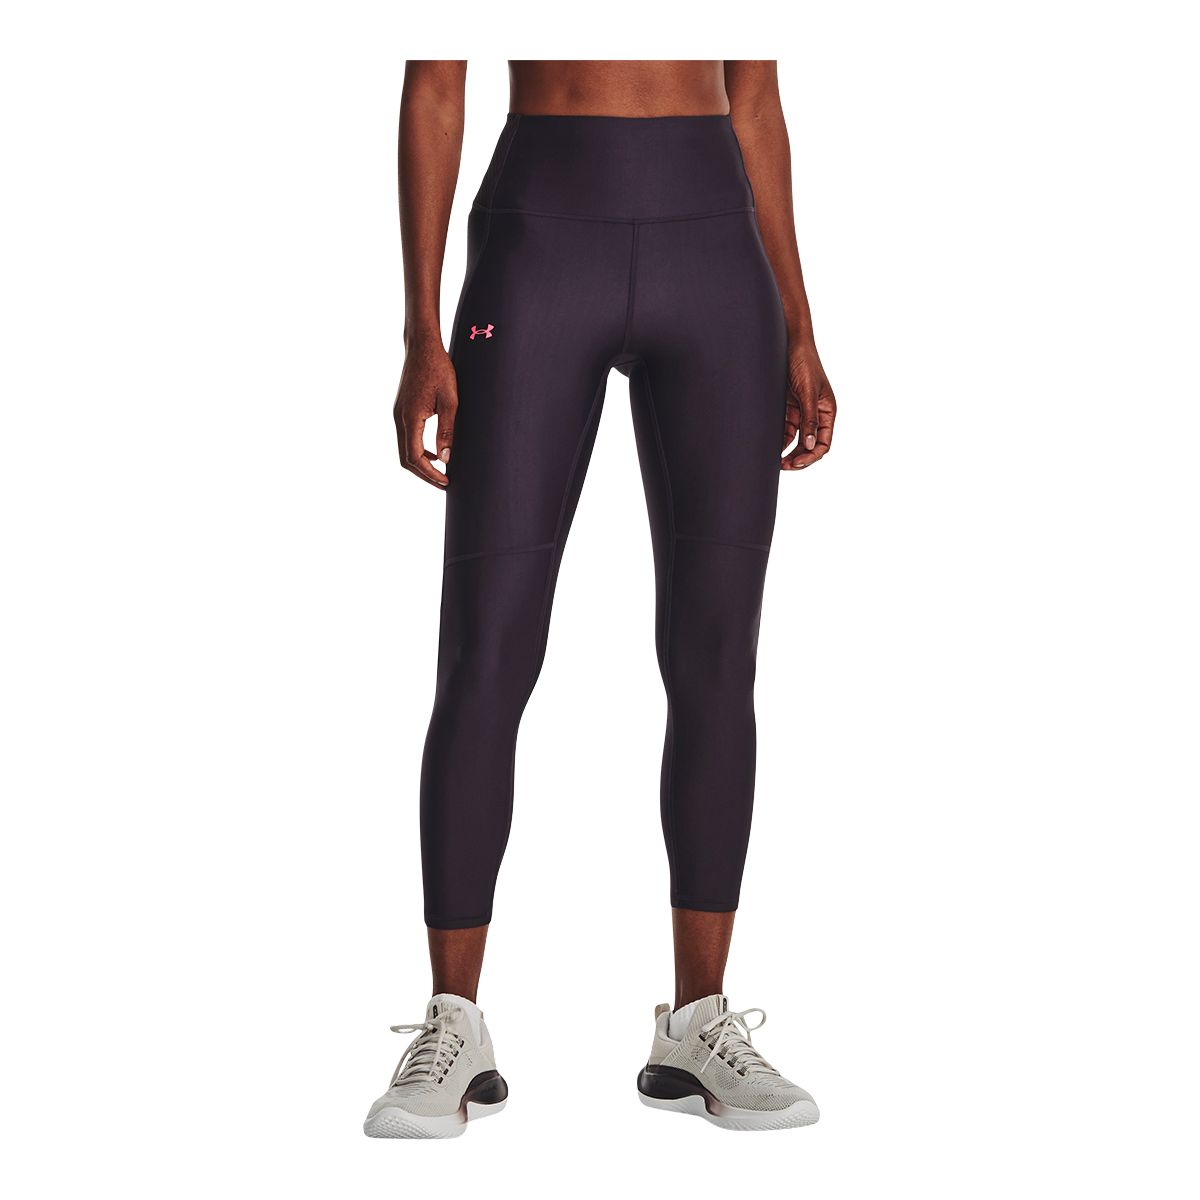 Womens compression leggings Under Armour FLY FAST 3.0 TIGHT W purple